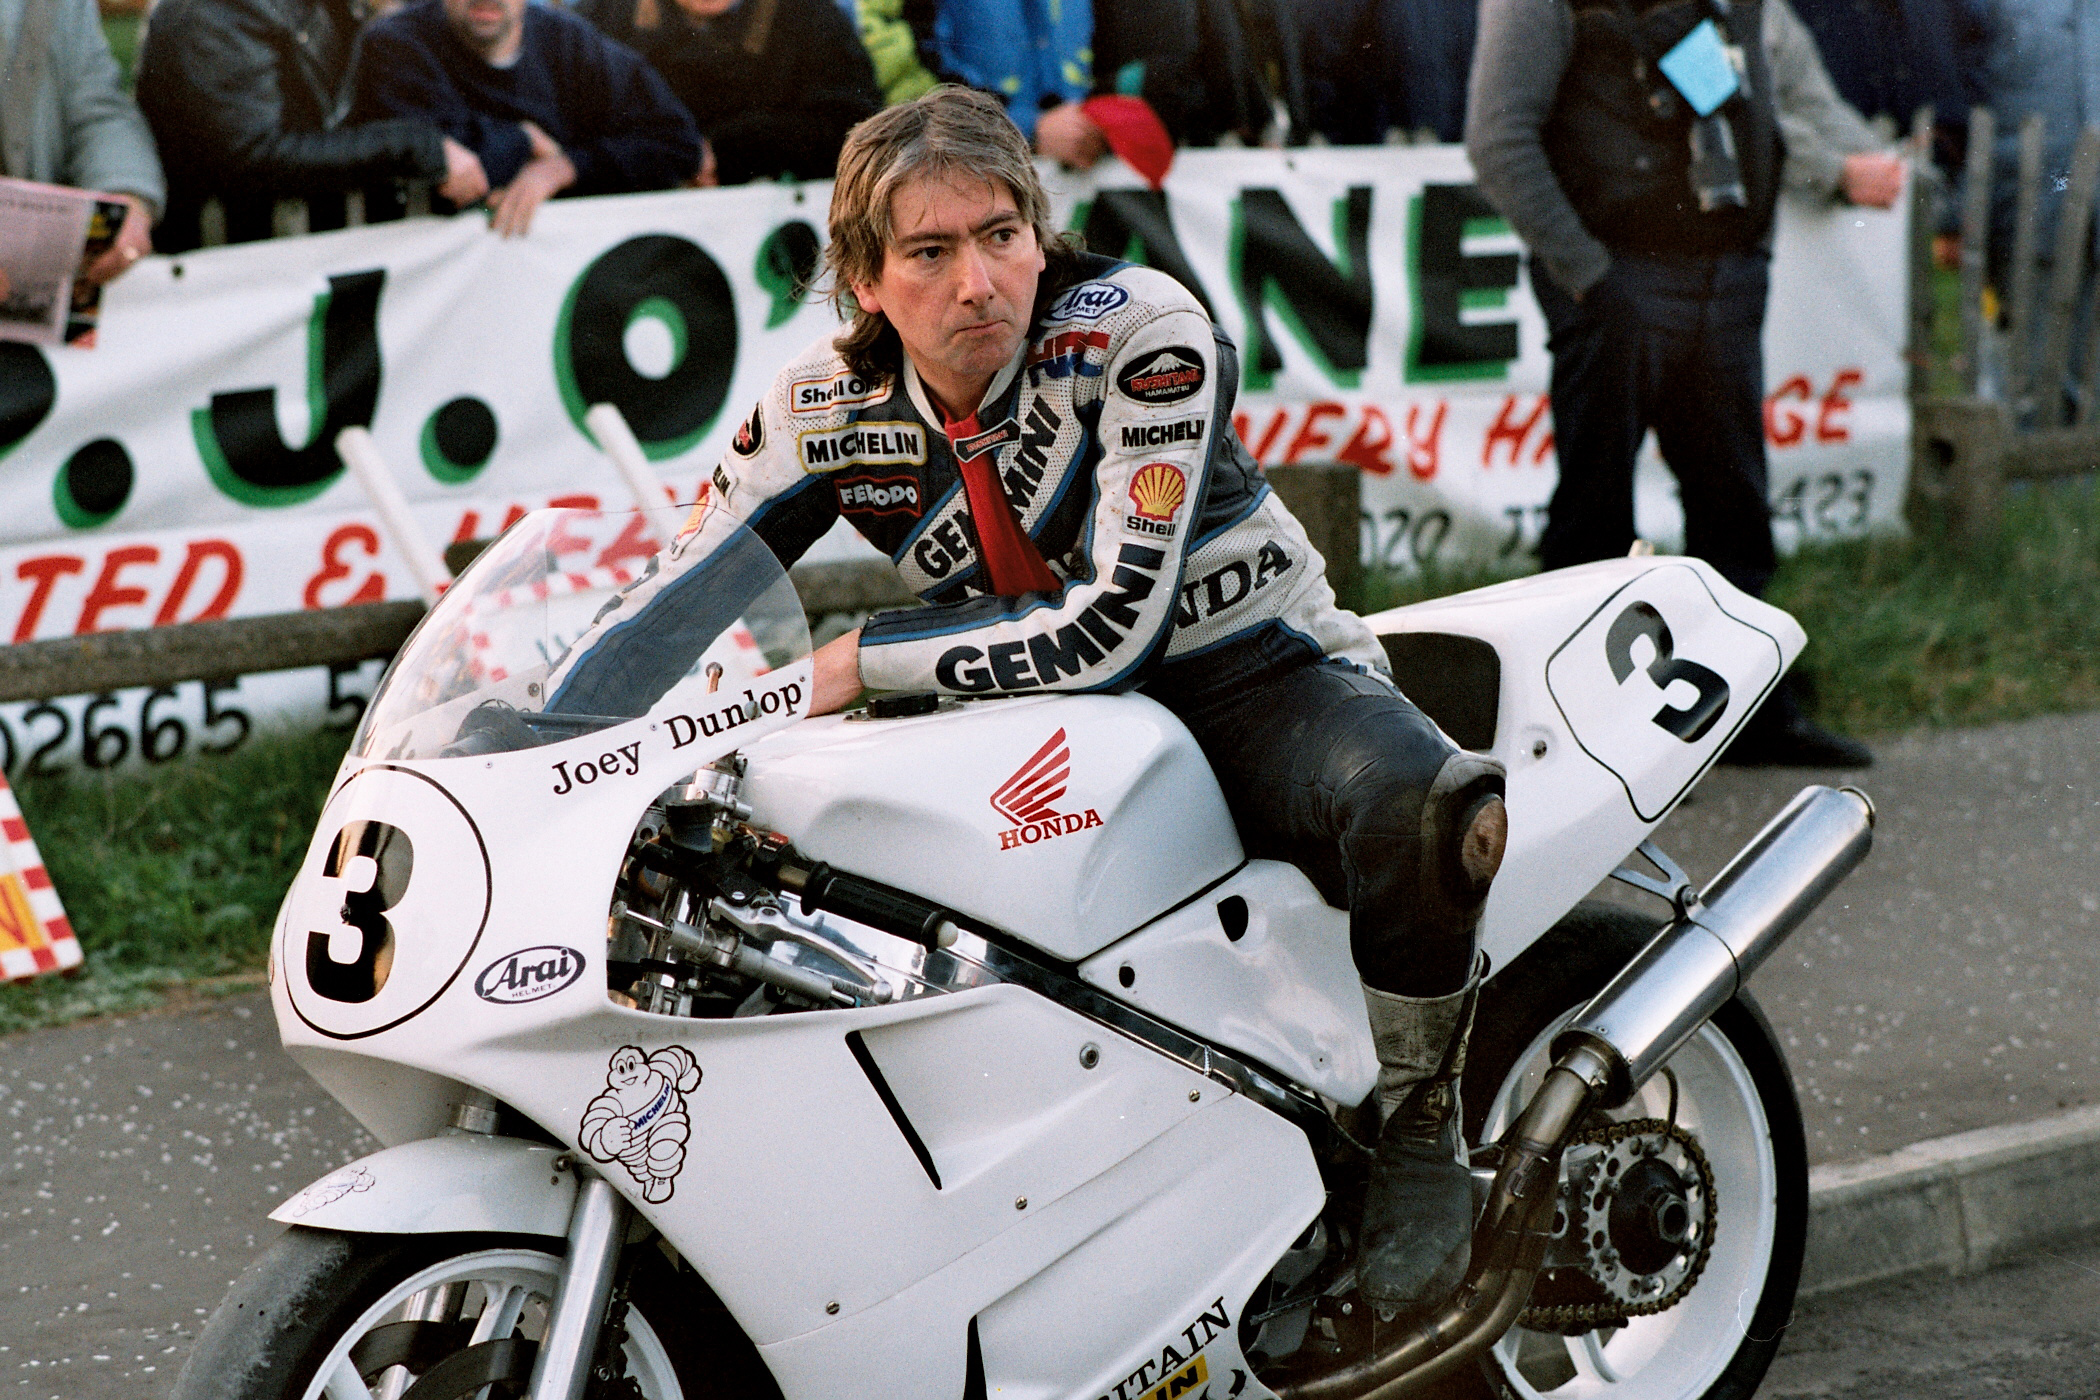 Joey on a 750cc Honda in 1990